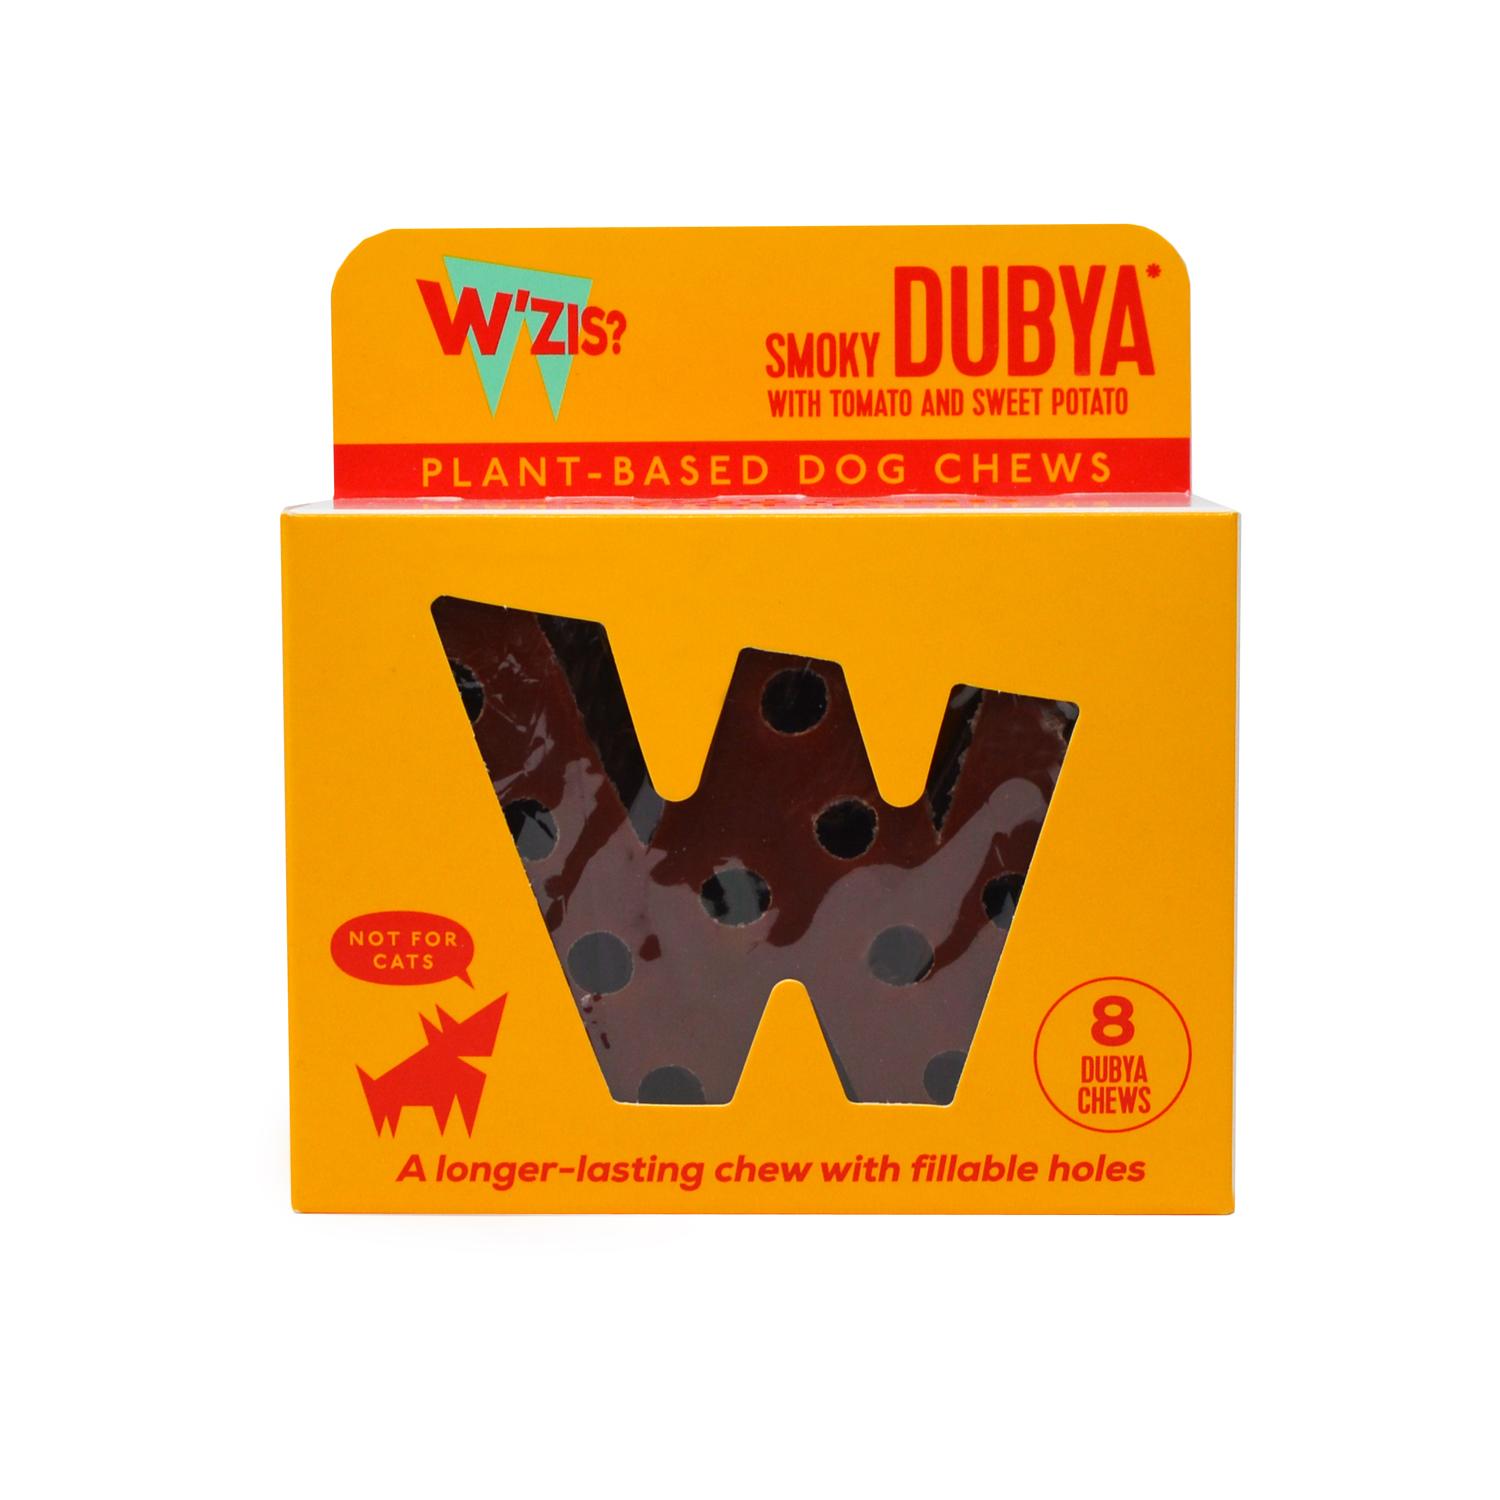 Front of a pack of Smoky Dubya plant based dog chews from W'ZIS?